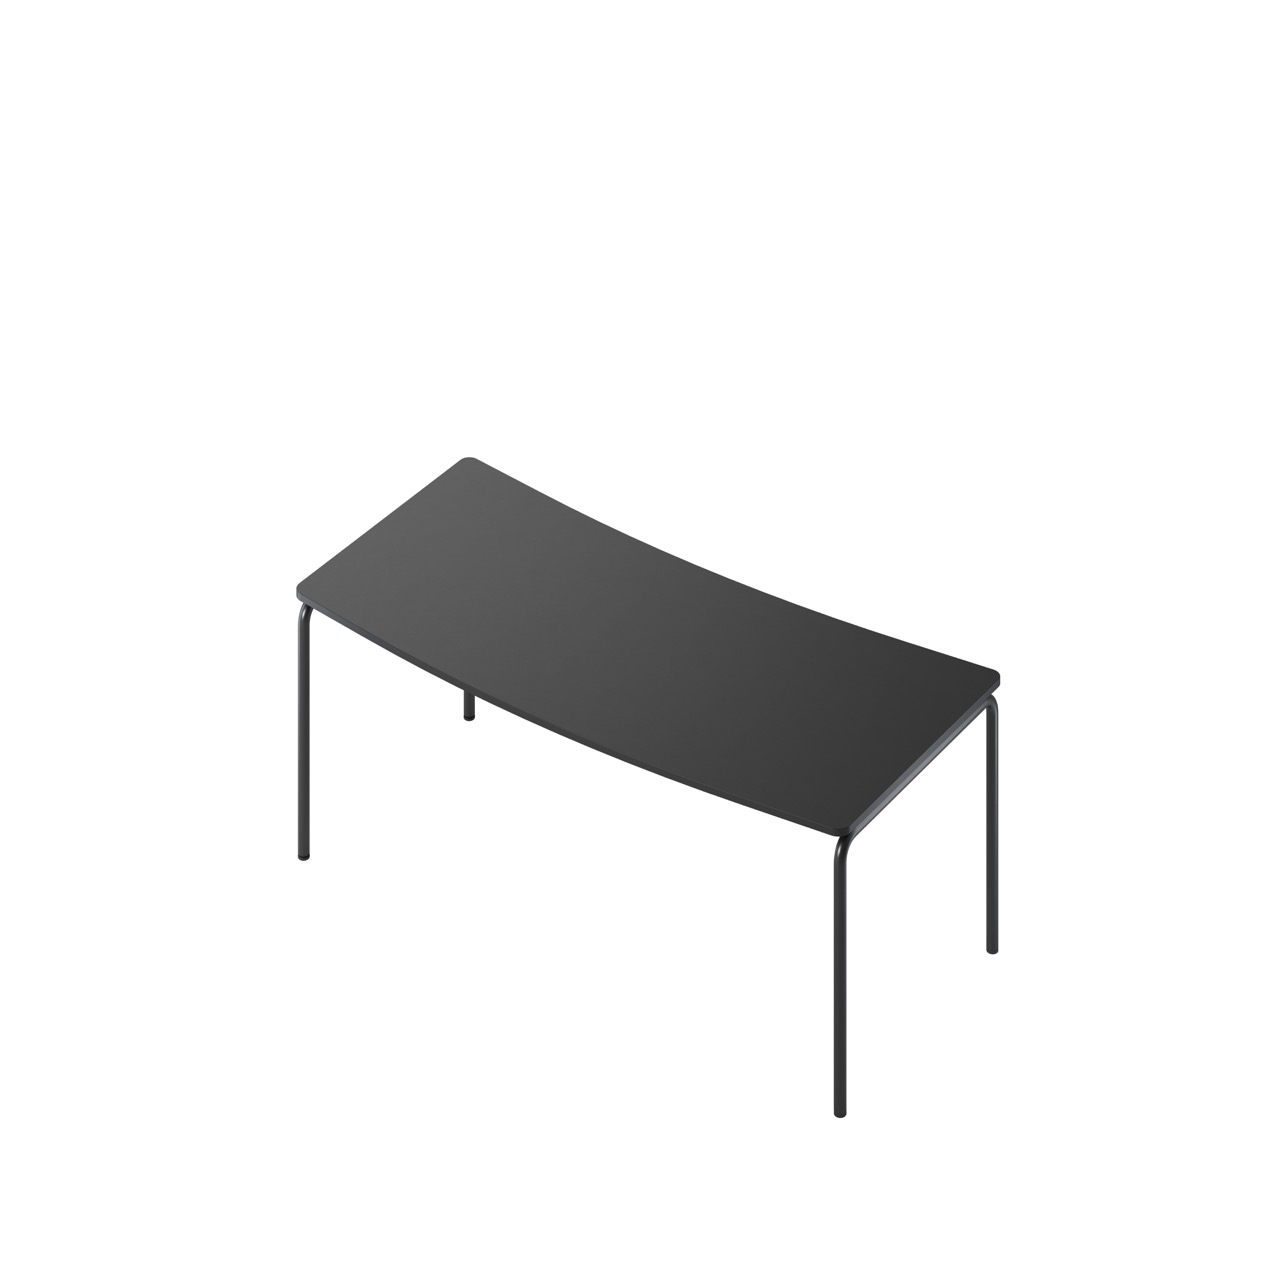 OCEE&FOUR - Tables - FourReal 74 - 180 x 80 - straight - Packshot Image 7 Large